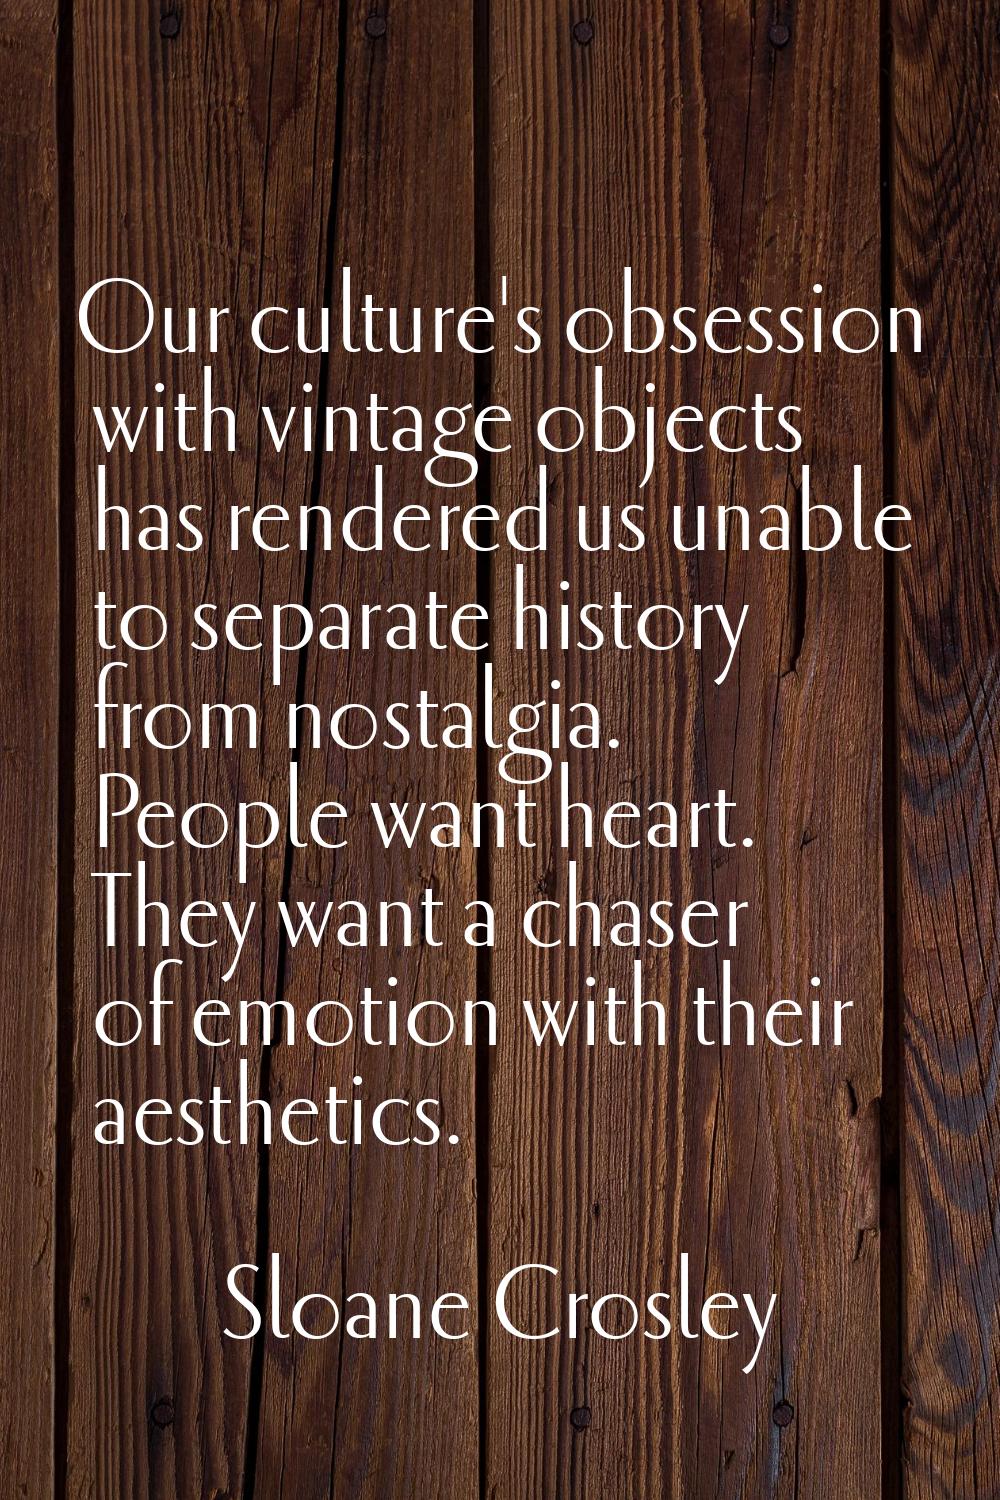 Our culture's obsession with vintage objects has rendered us unable to separate history from nostal